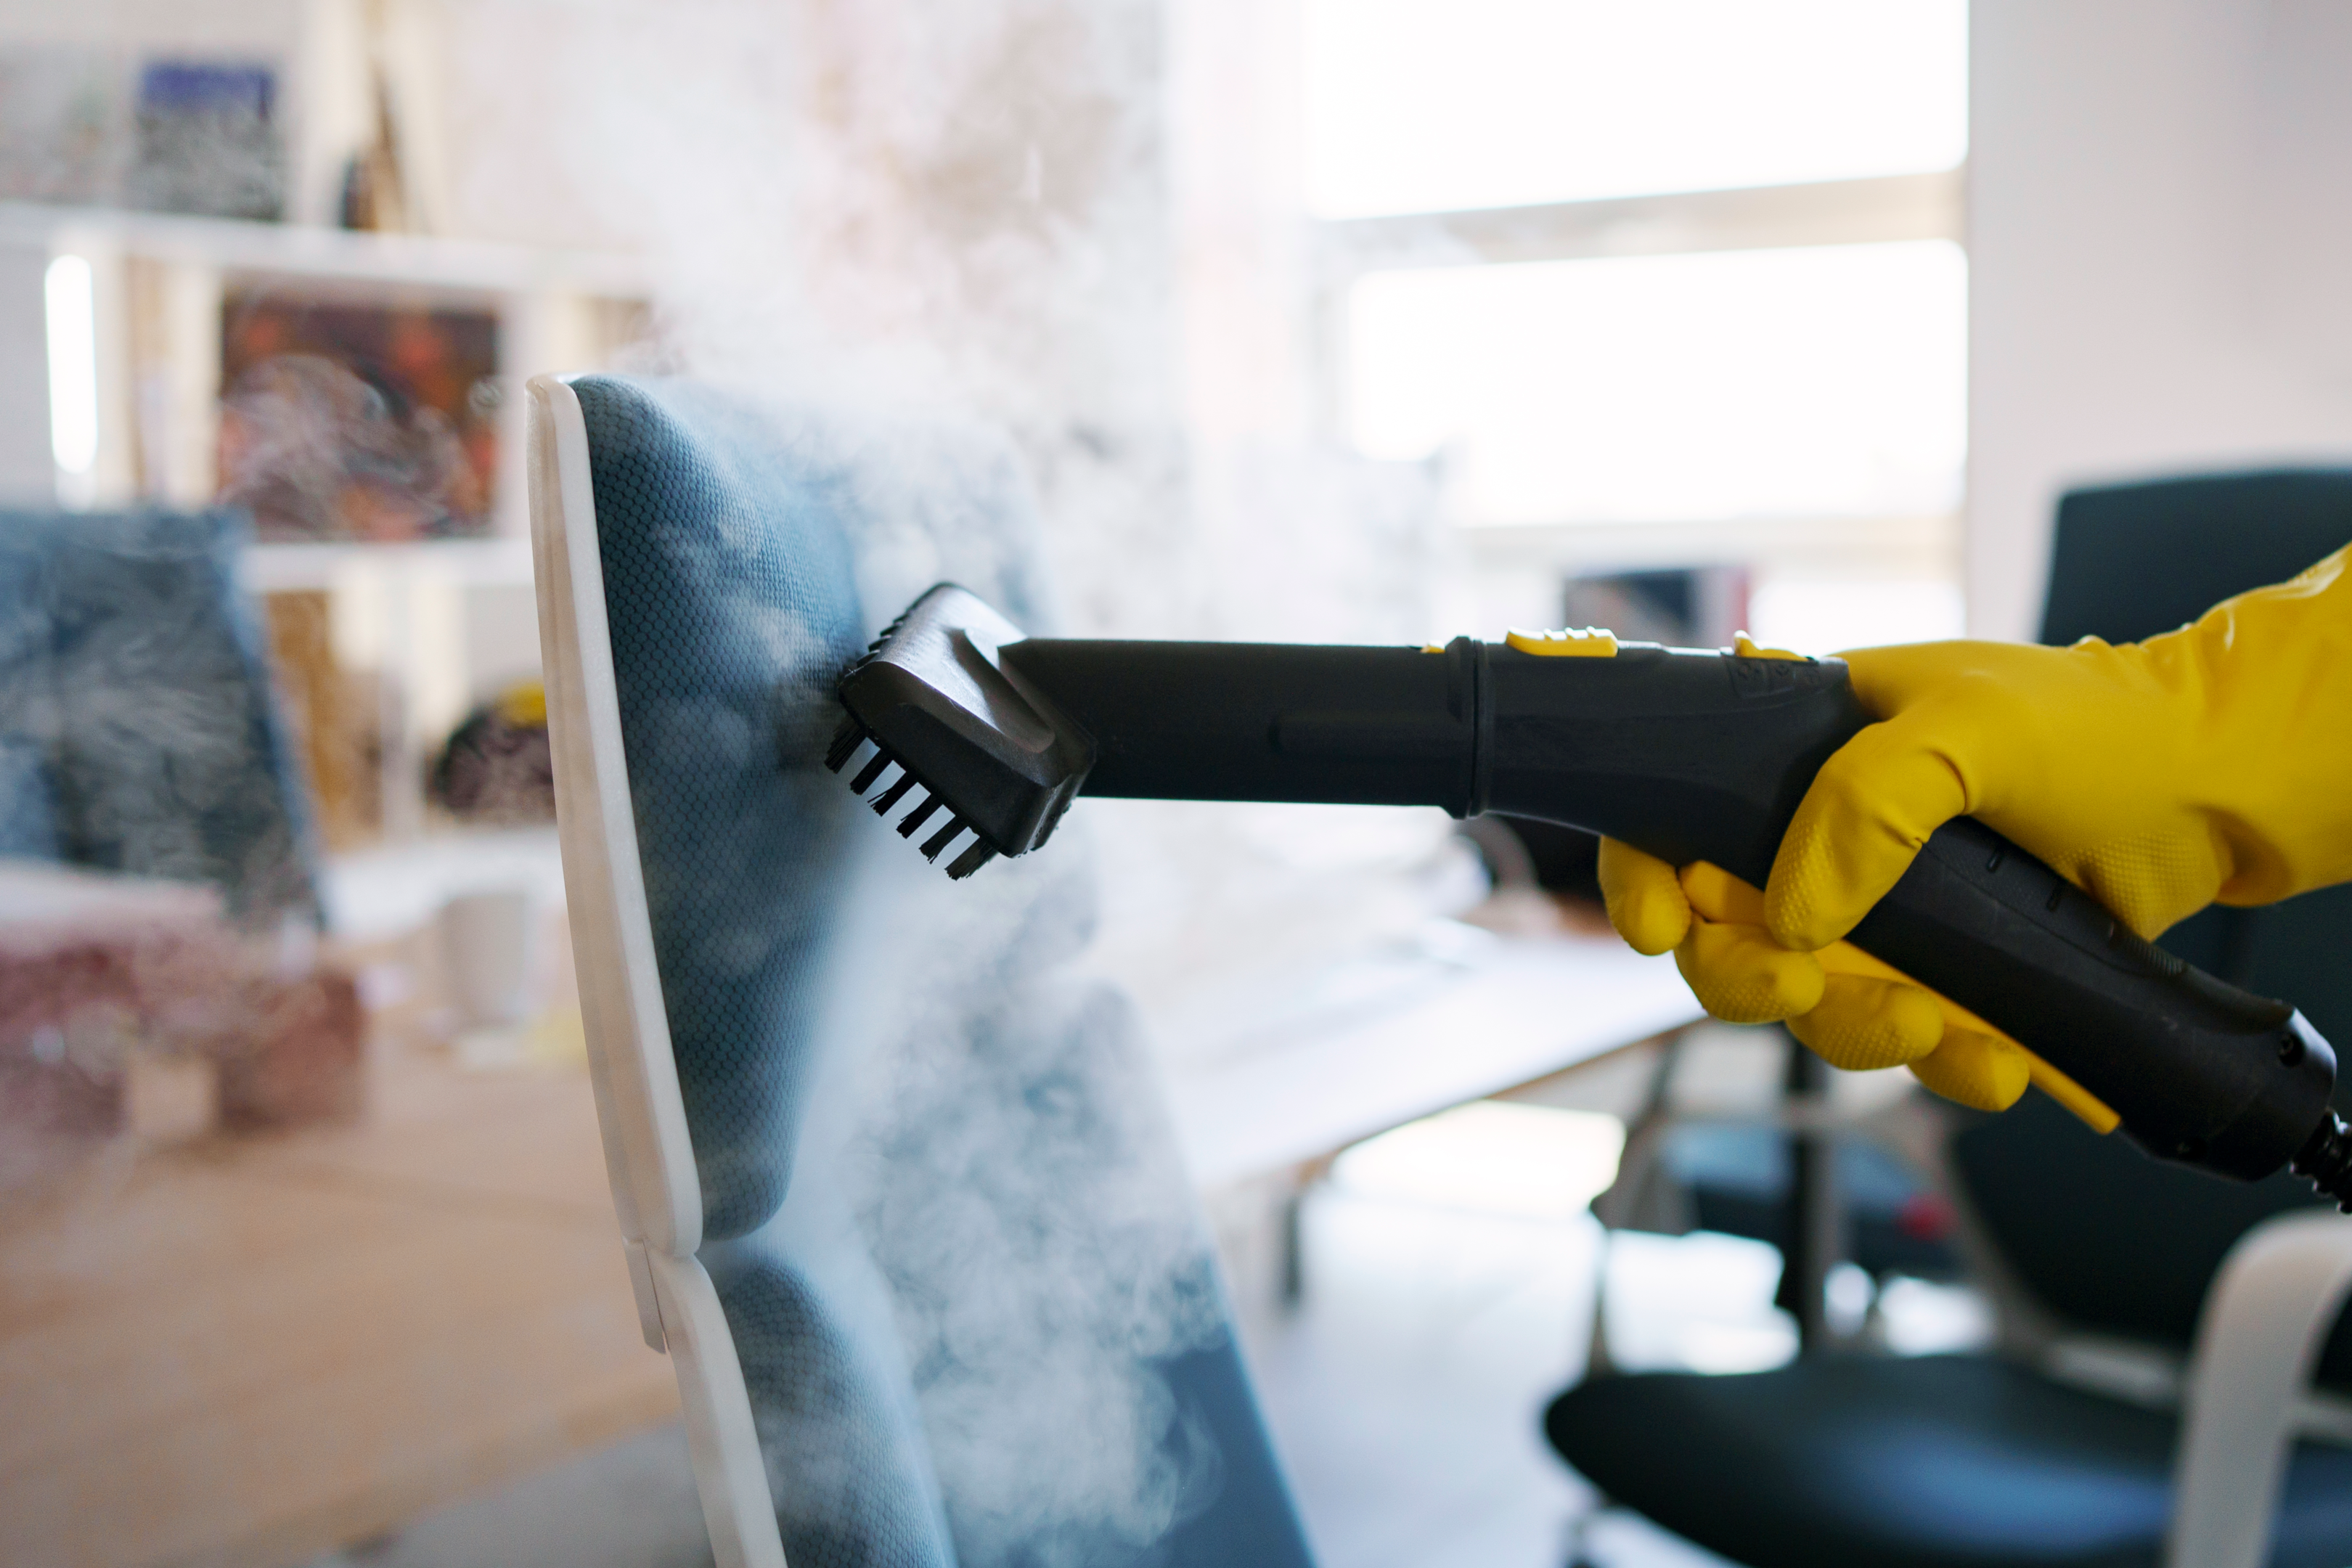 A person using a steam cleaner to clean upholstered furniture